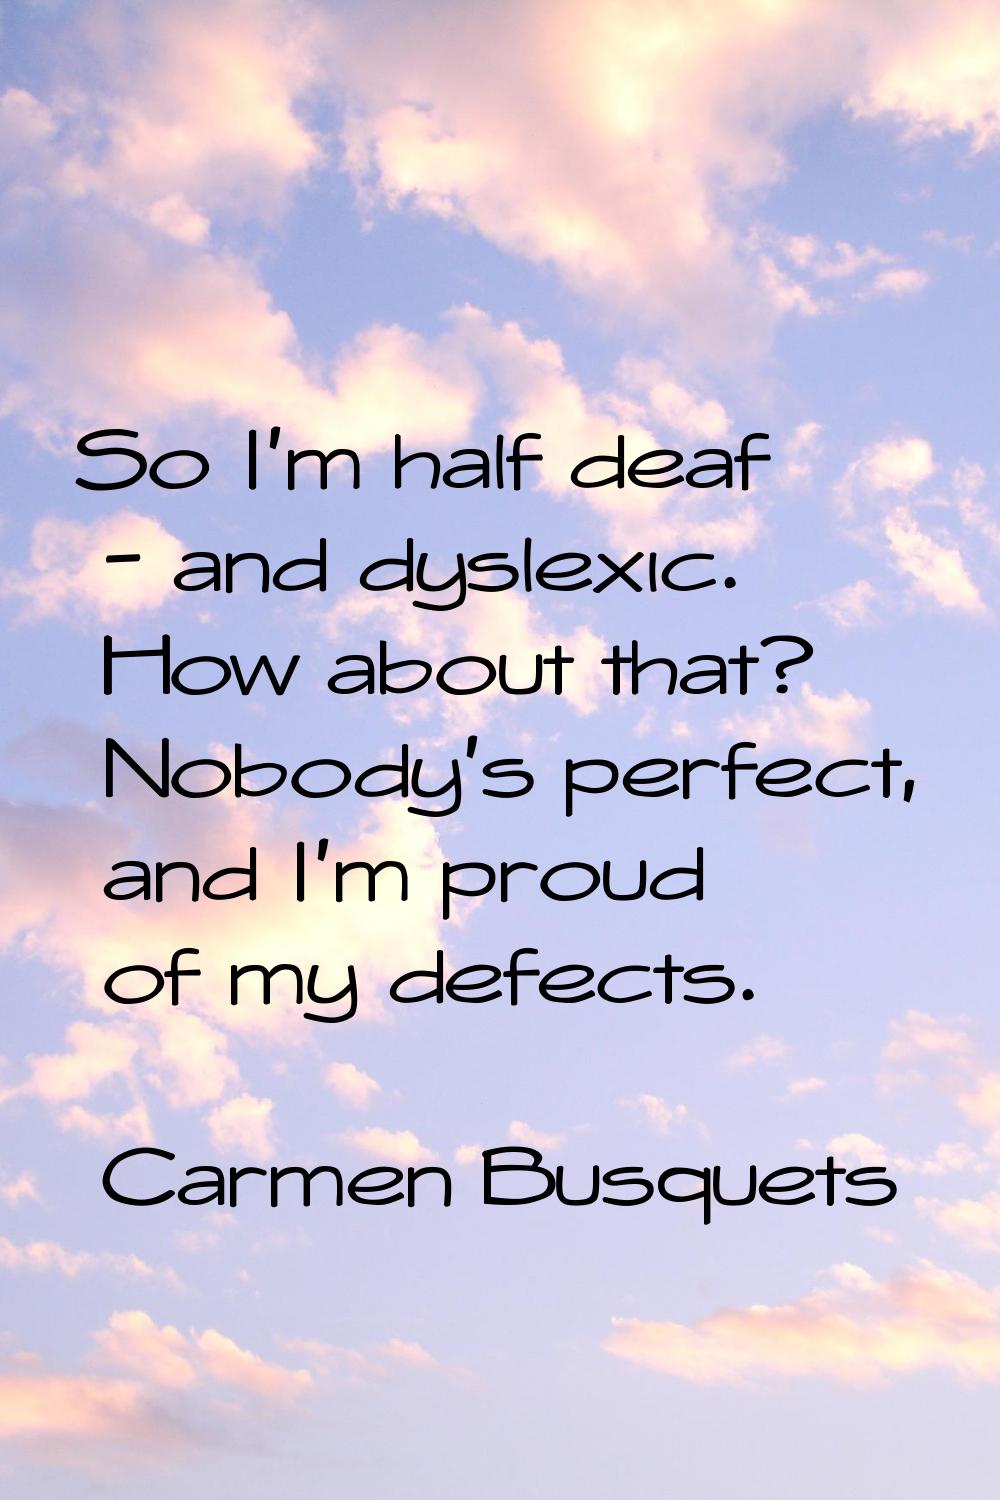 So I'm half deaf - and dyslexic. How about that? Nobody's perfect, and I'm proud of my defects.